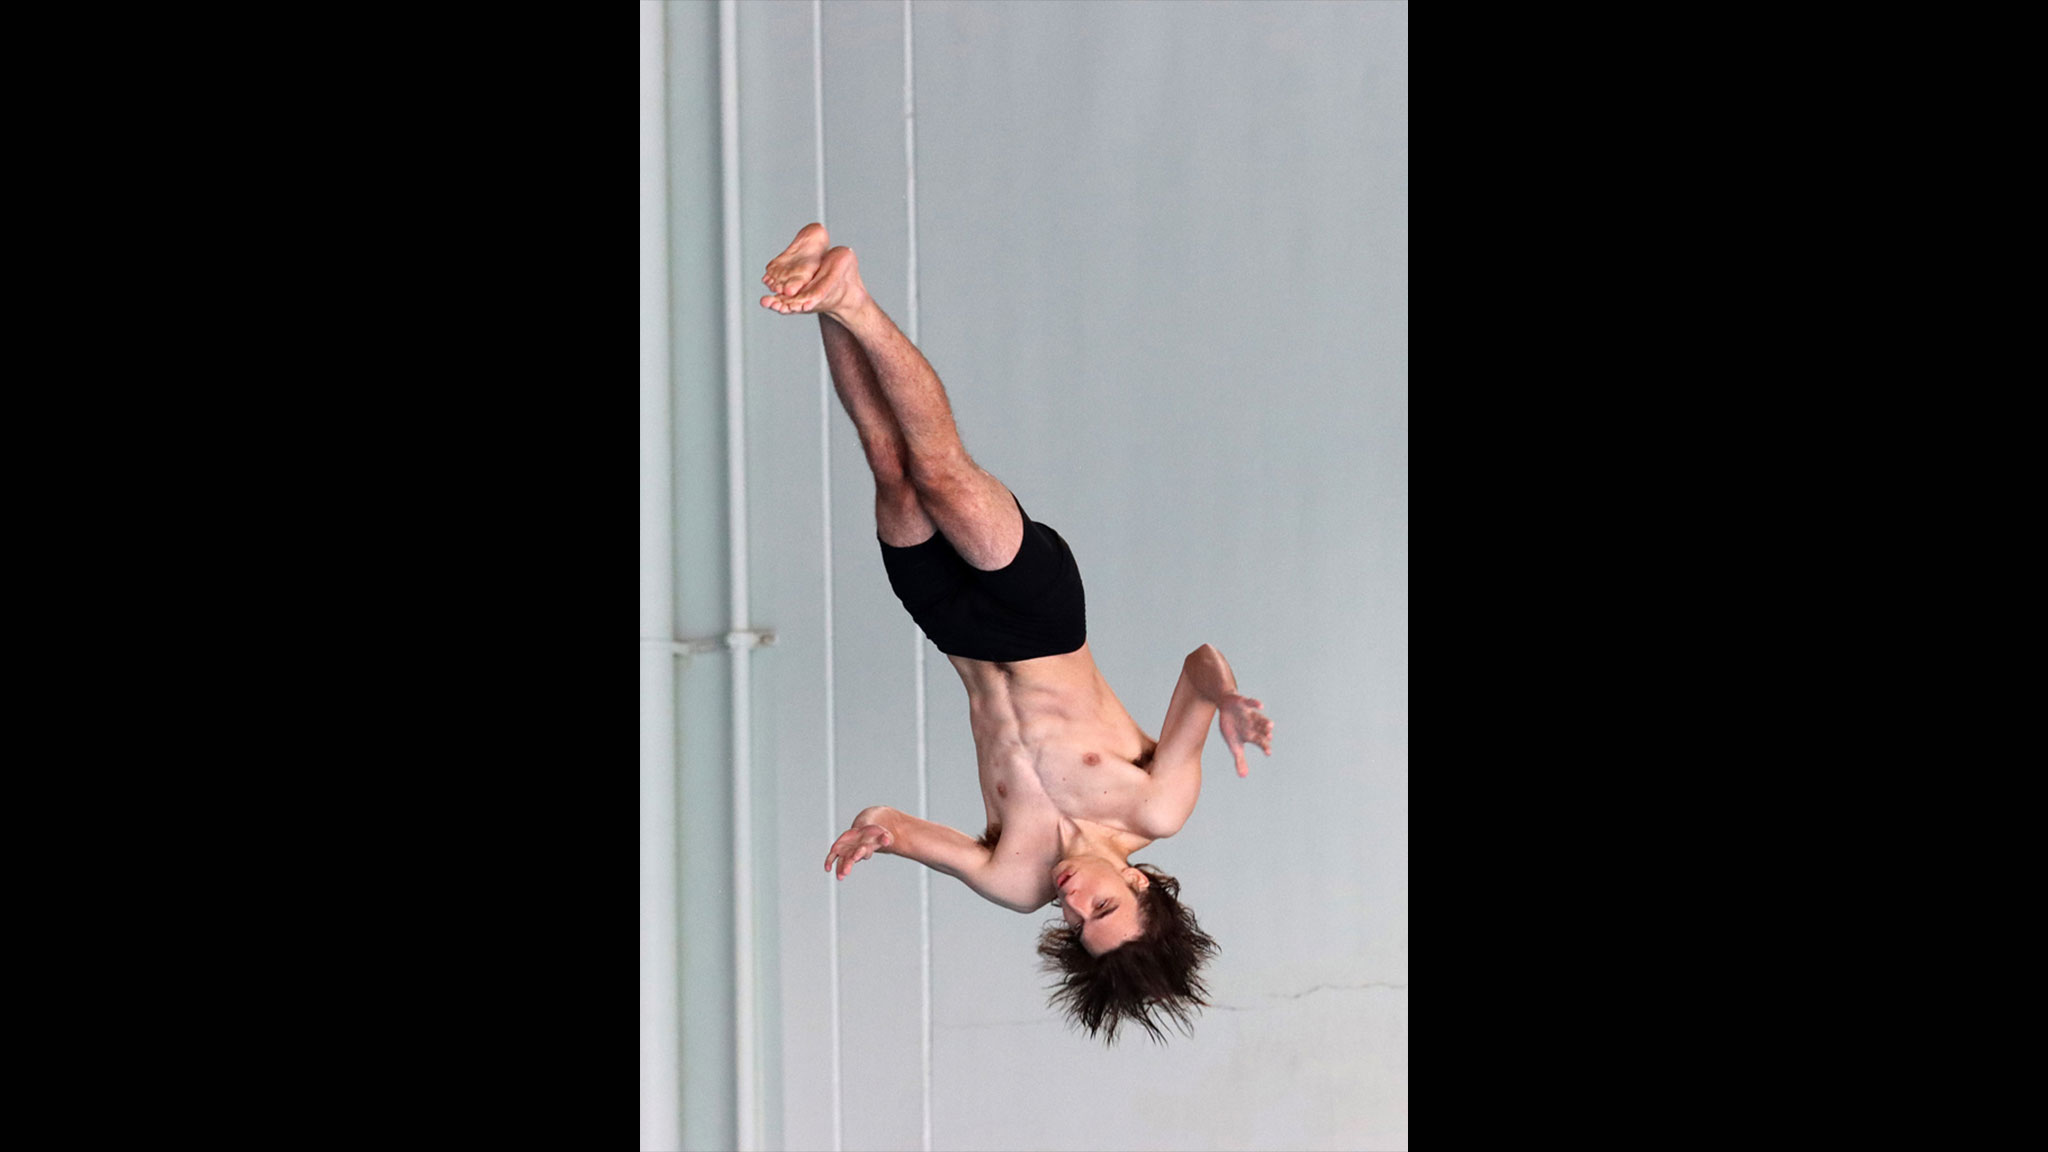 Taylor diving champ, men finish in 7th